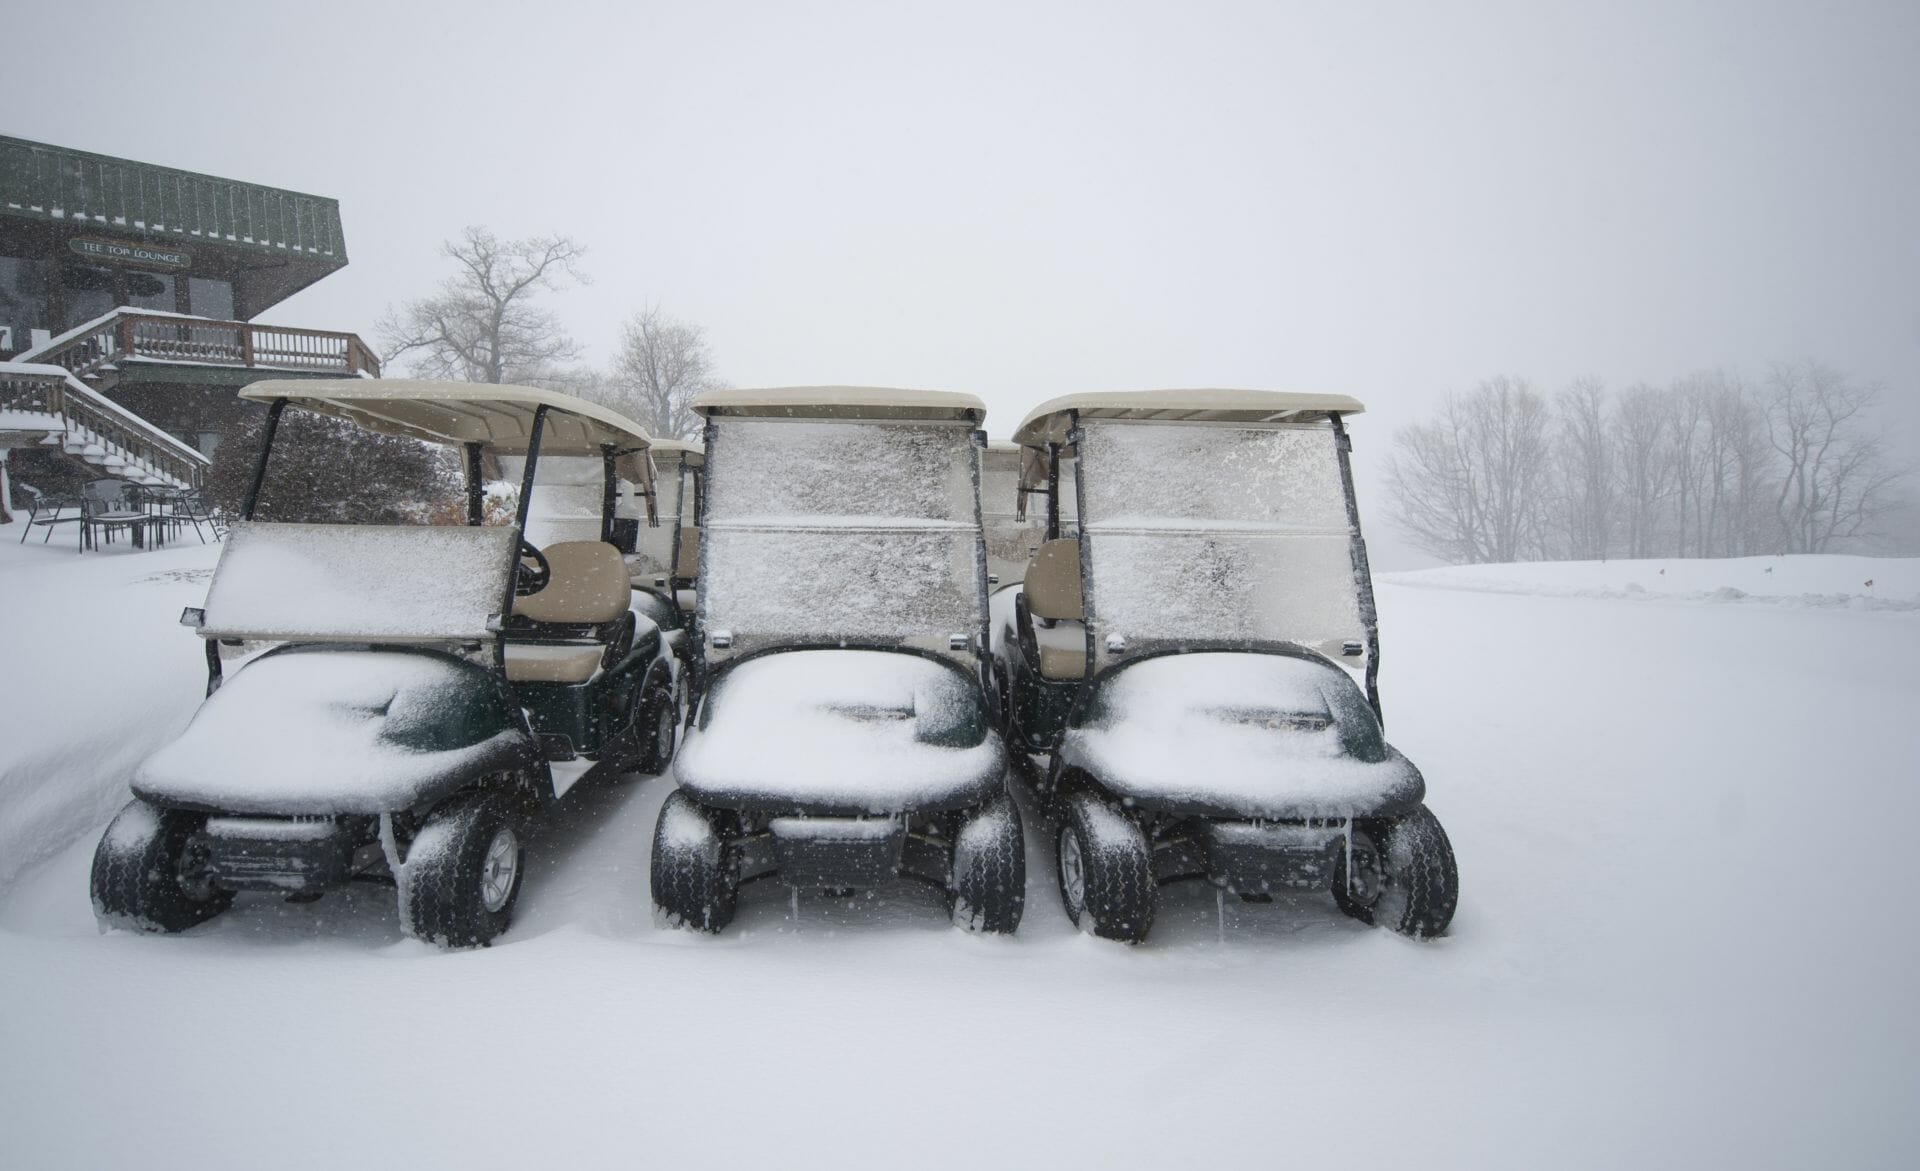 Winter is coming and our PGA professionals need our help